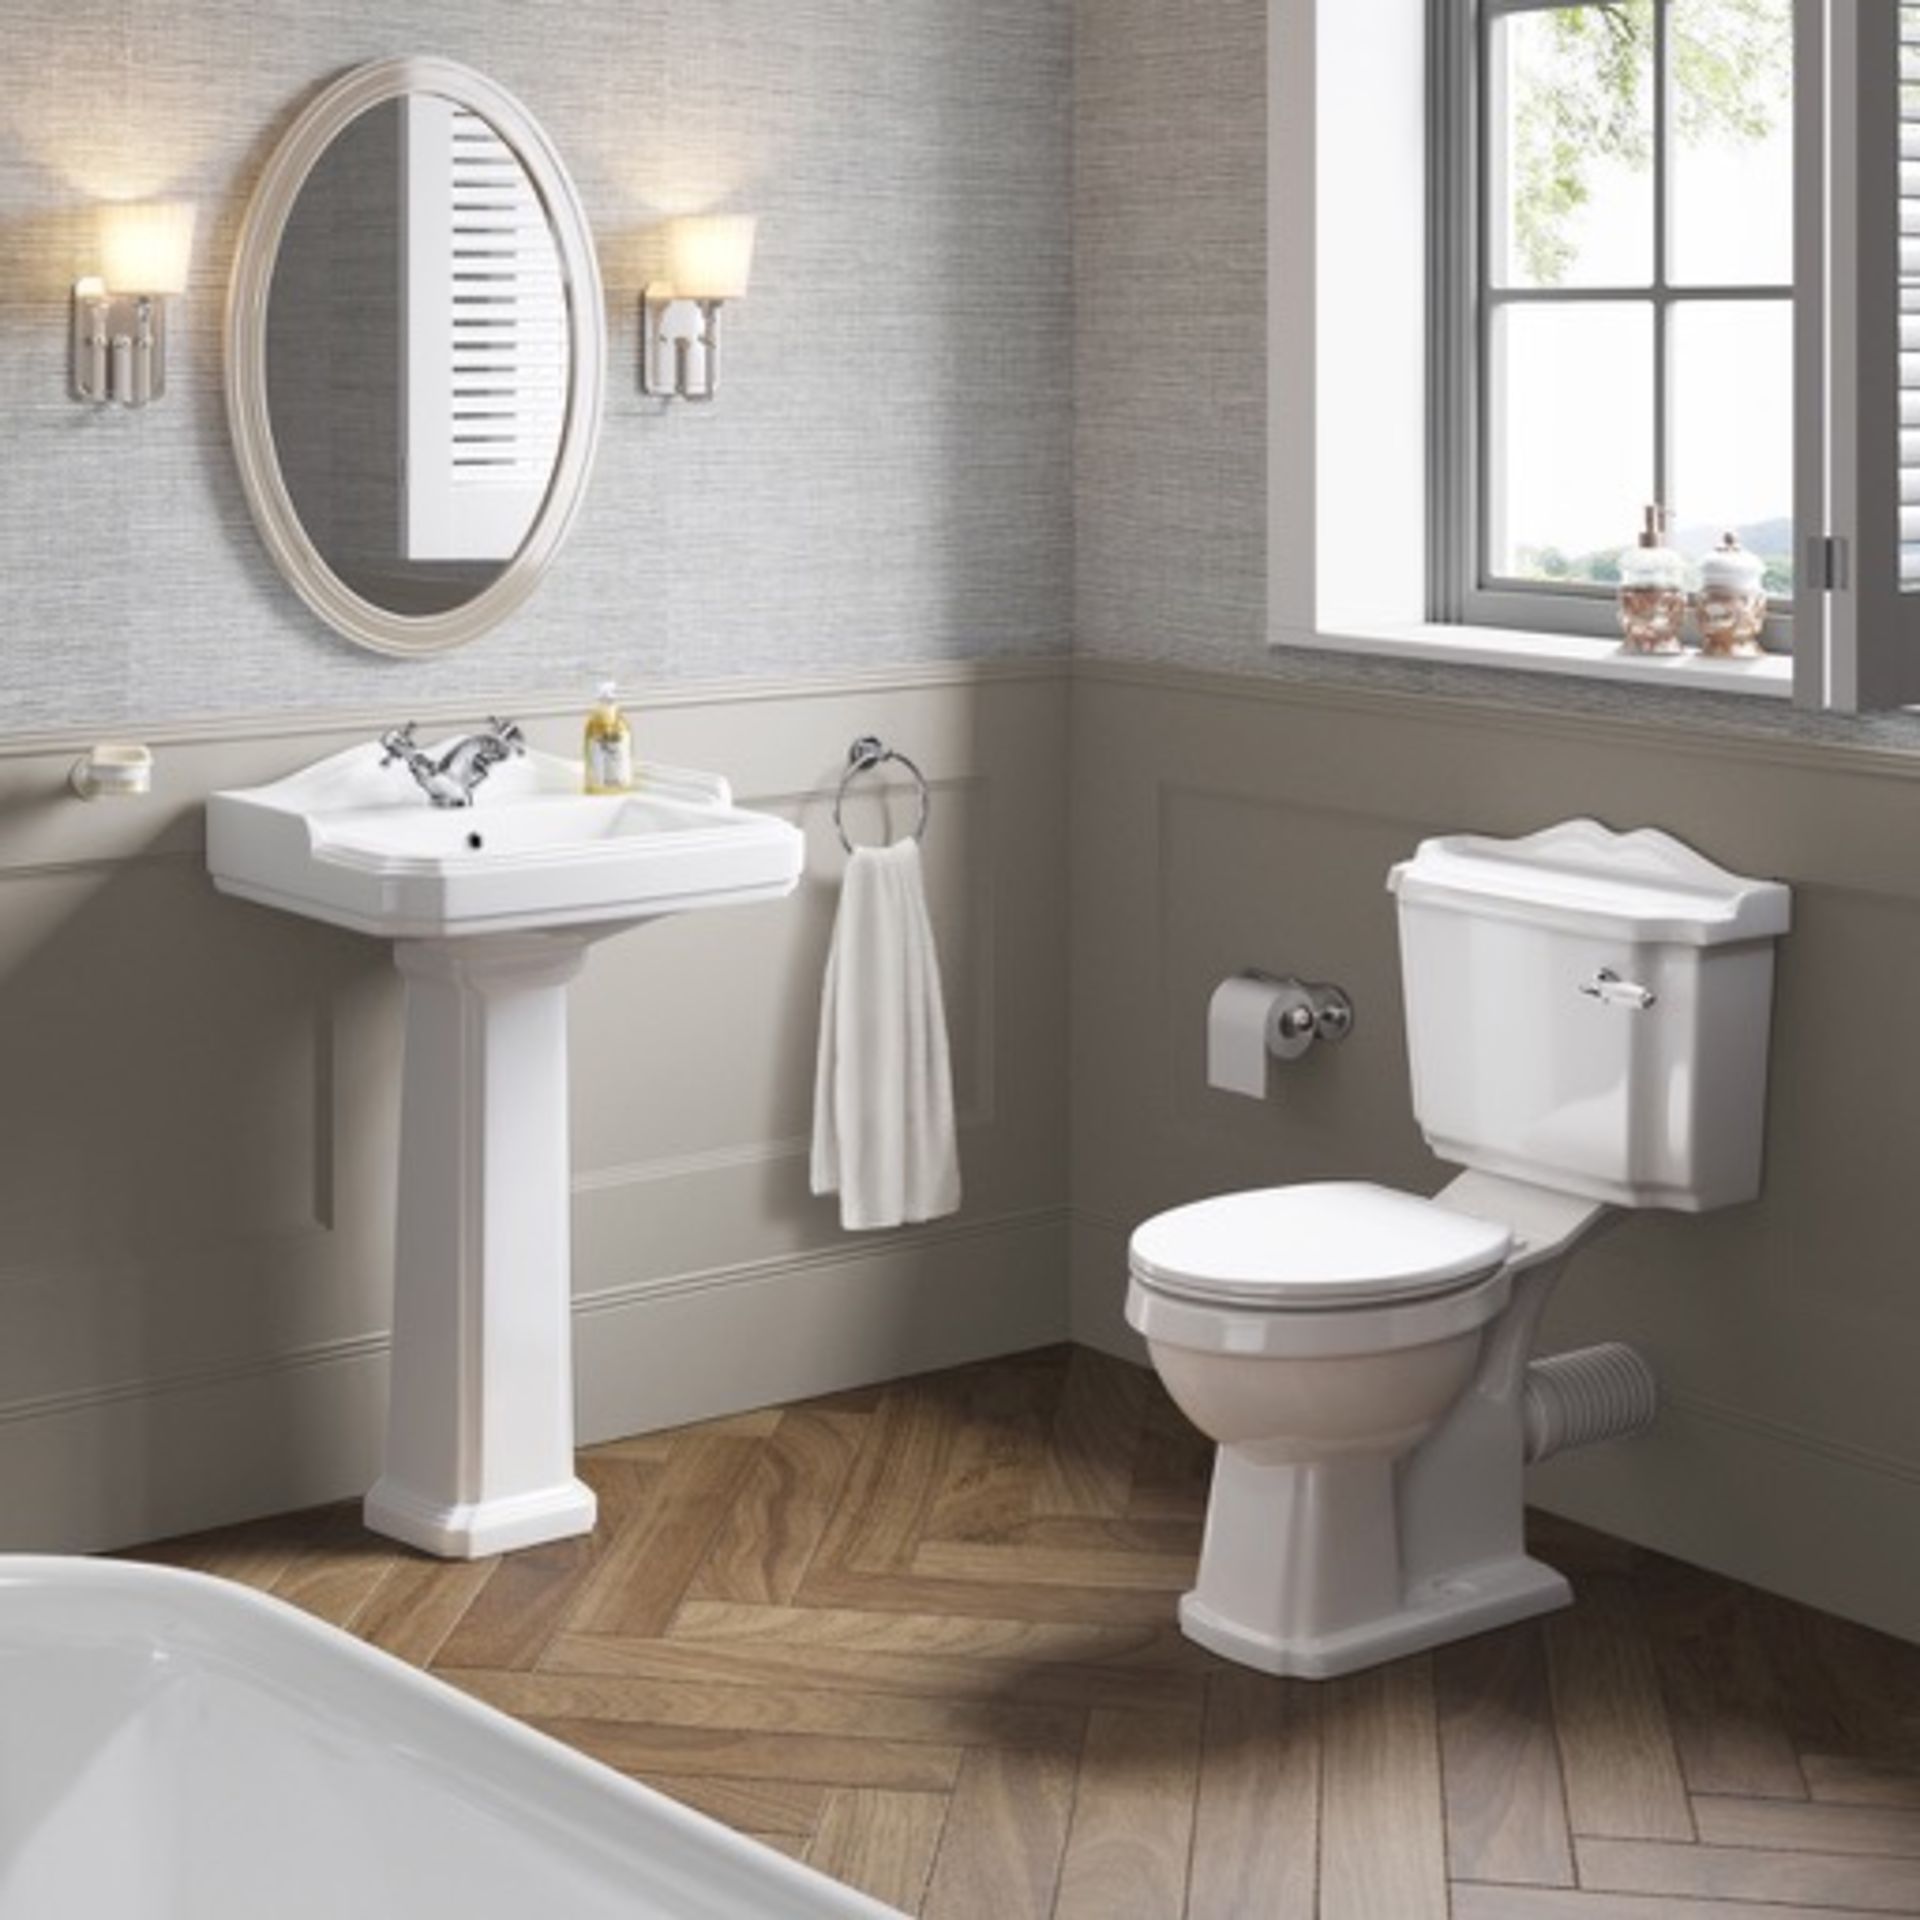 PALLET TO CONTAIN 8 x Victoria Basin & Pedestal - Single Tap Hole. RRP £175.99, TOTAL RRP £1,407.92. - Image 2 of 4